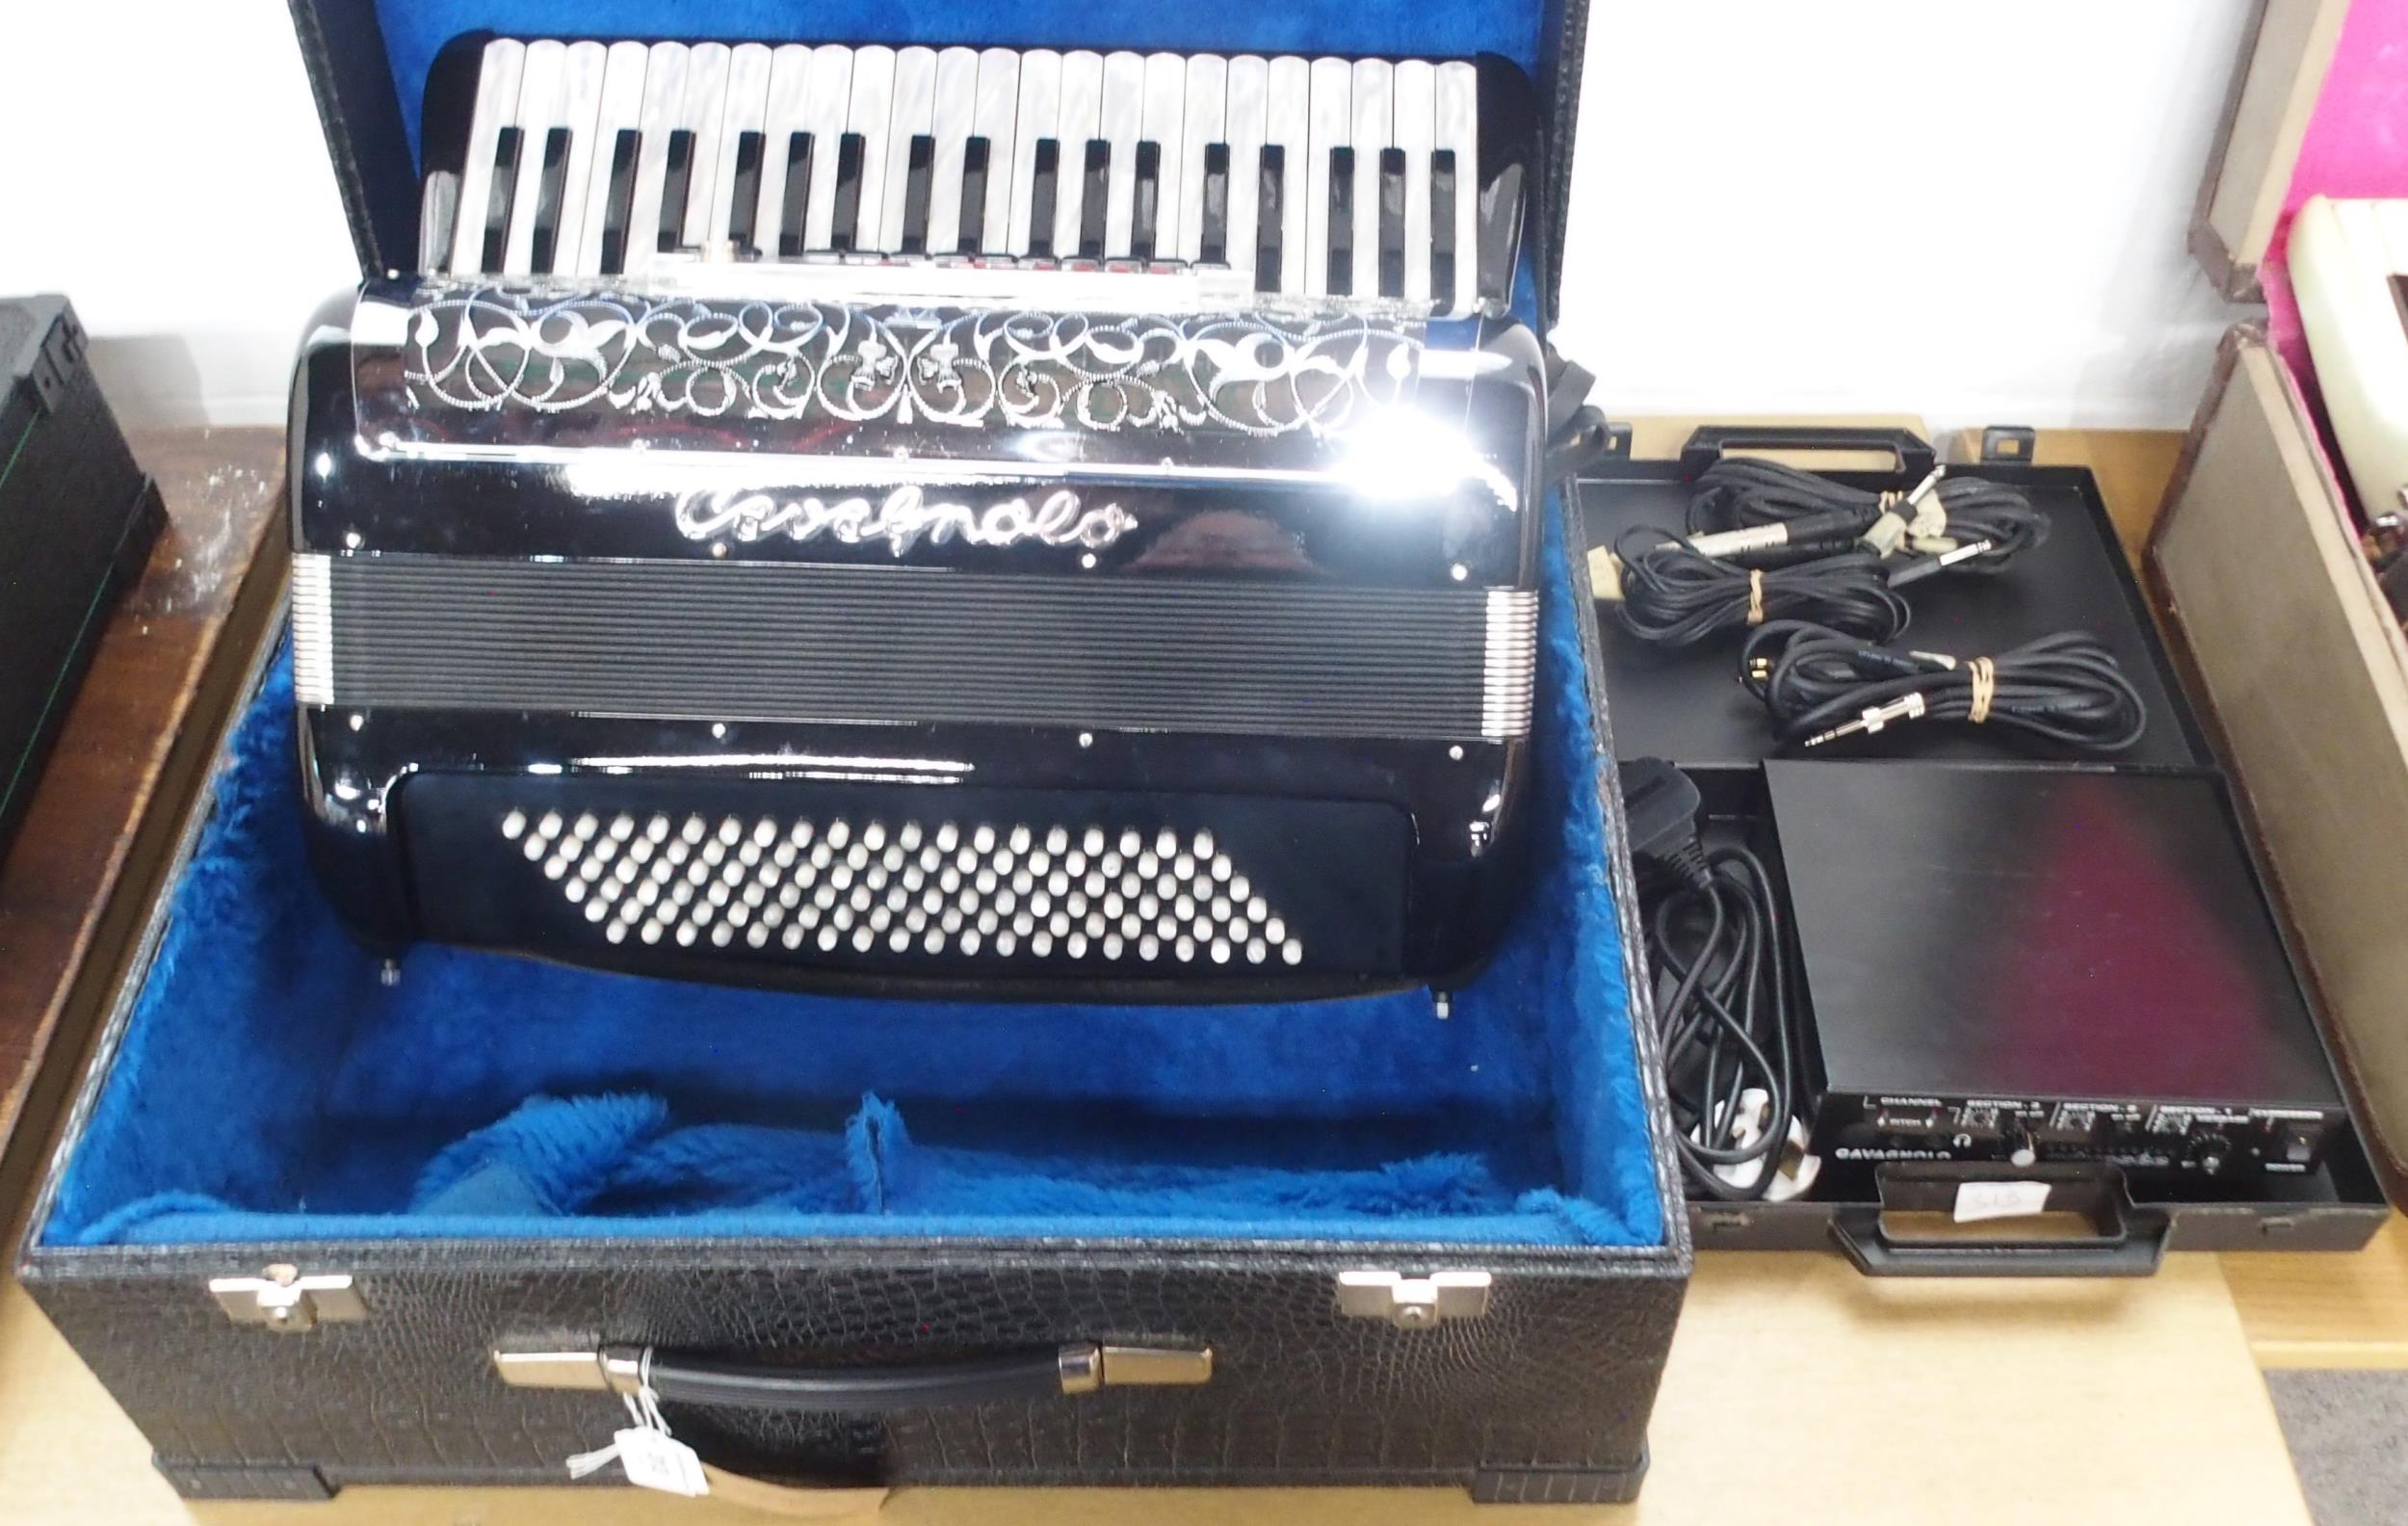 A Cavognolo Odysee reedless 120 bass 41 key piano accordion serial number 45602 together with a